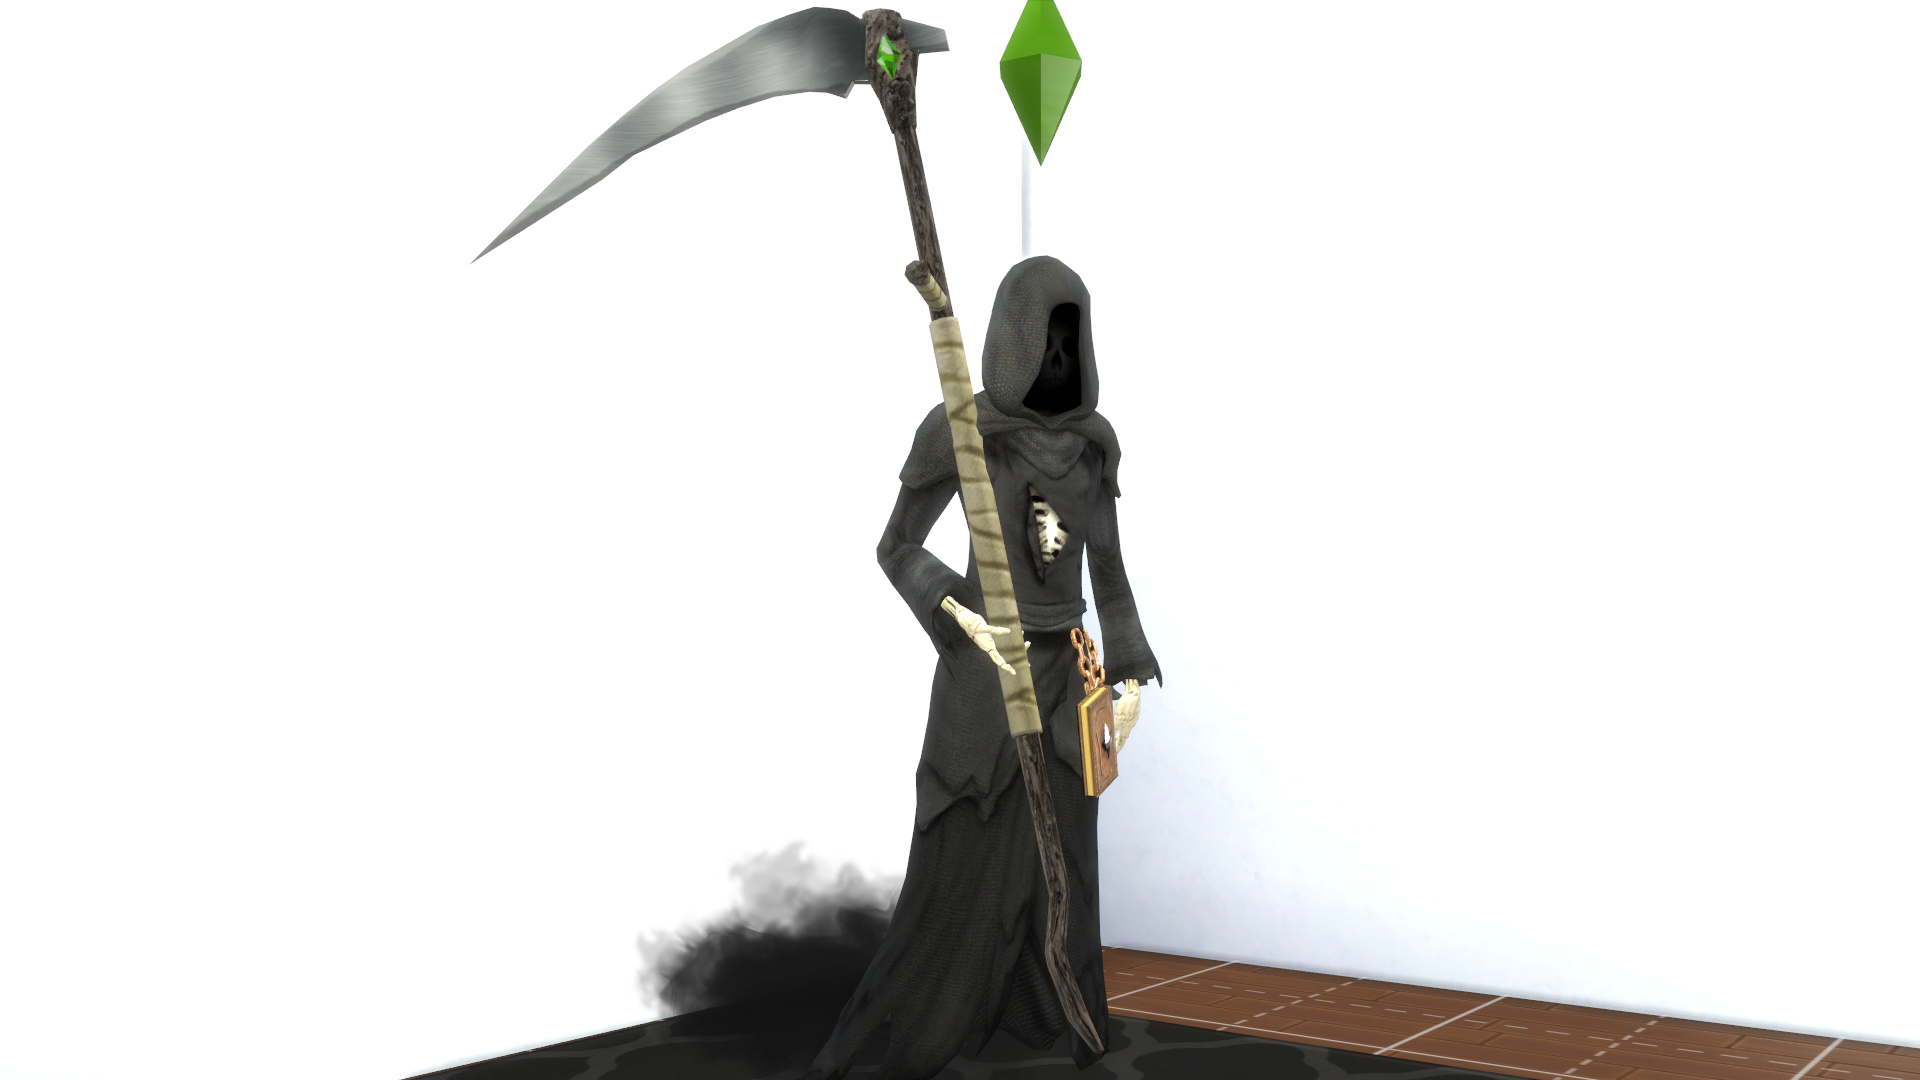 Mod The Sims Grim Reaper Default Replacement